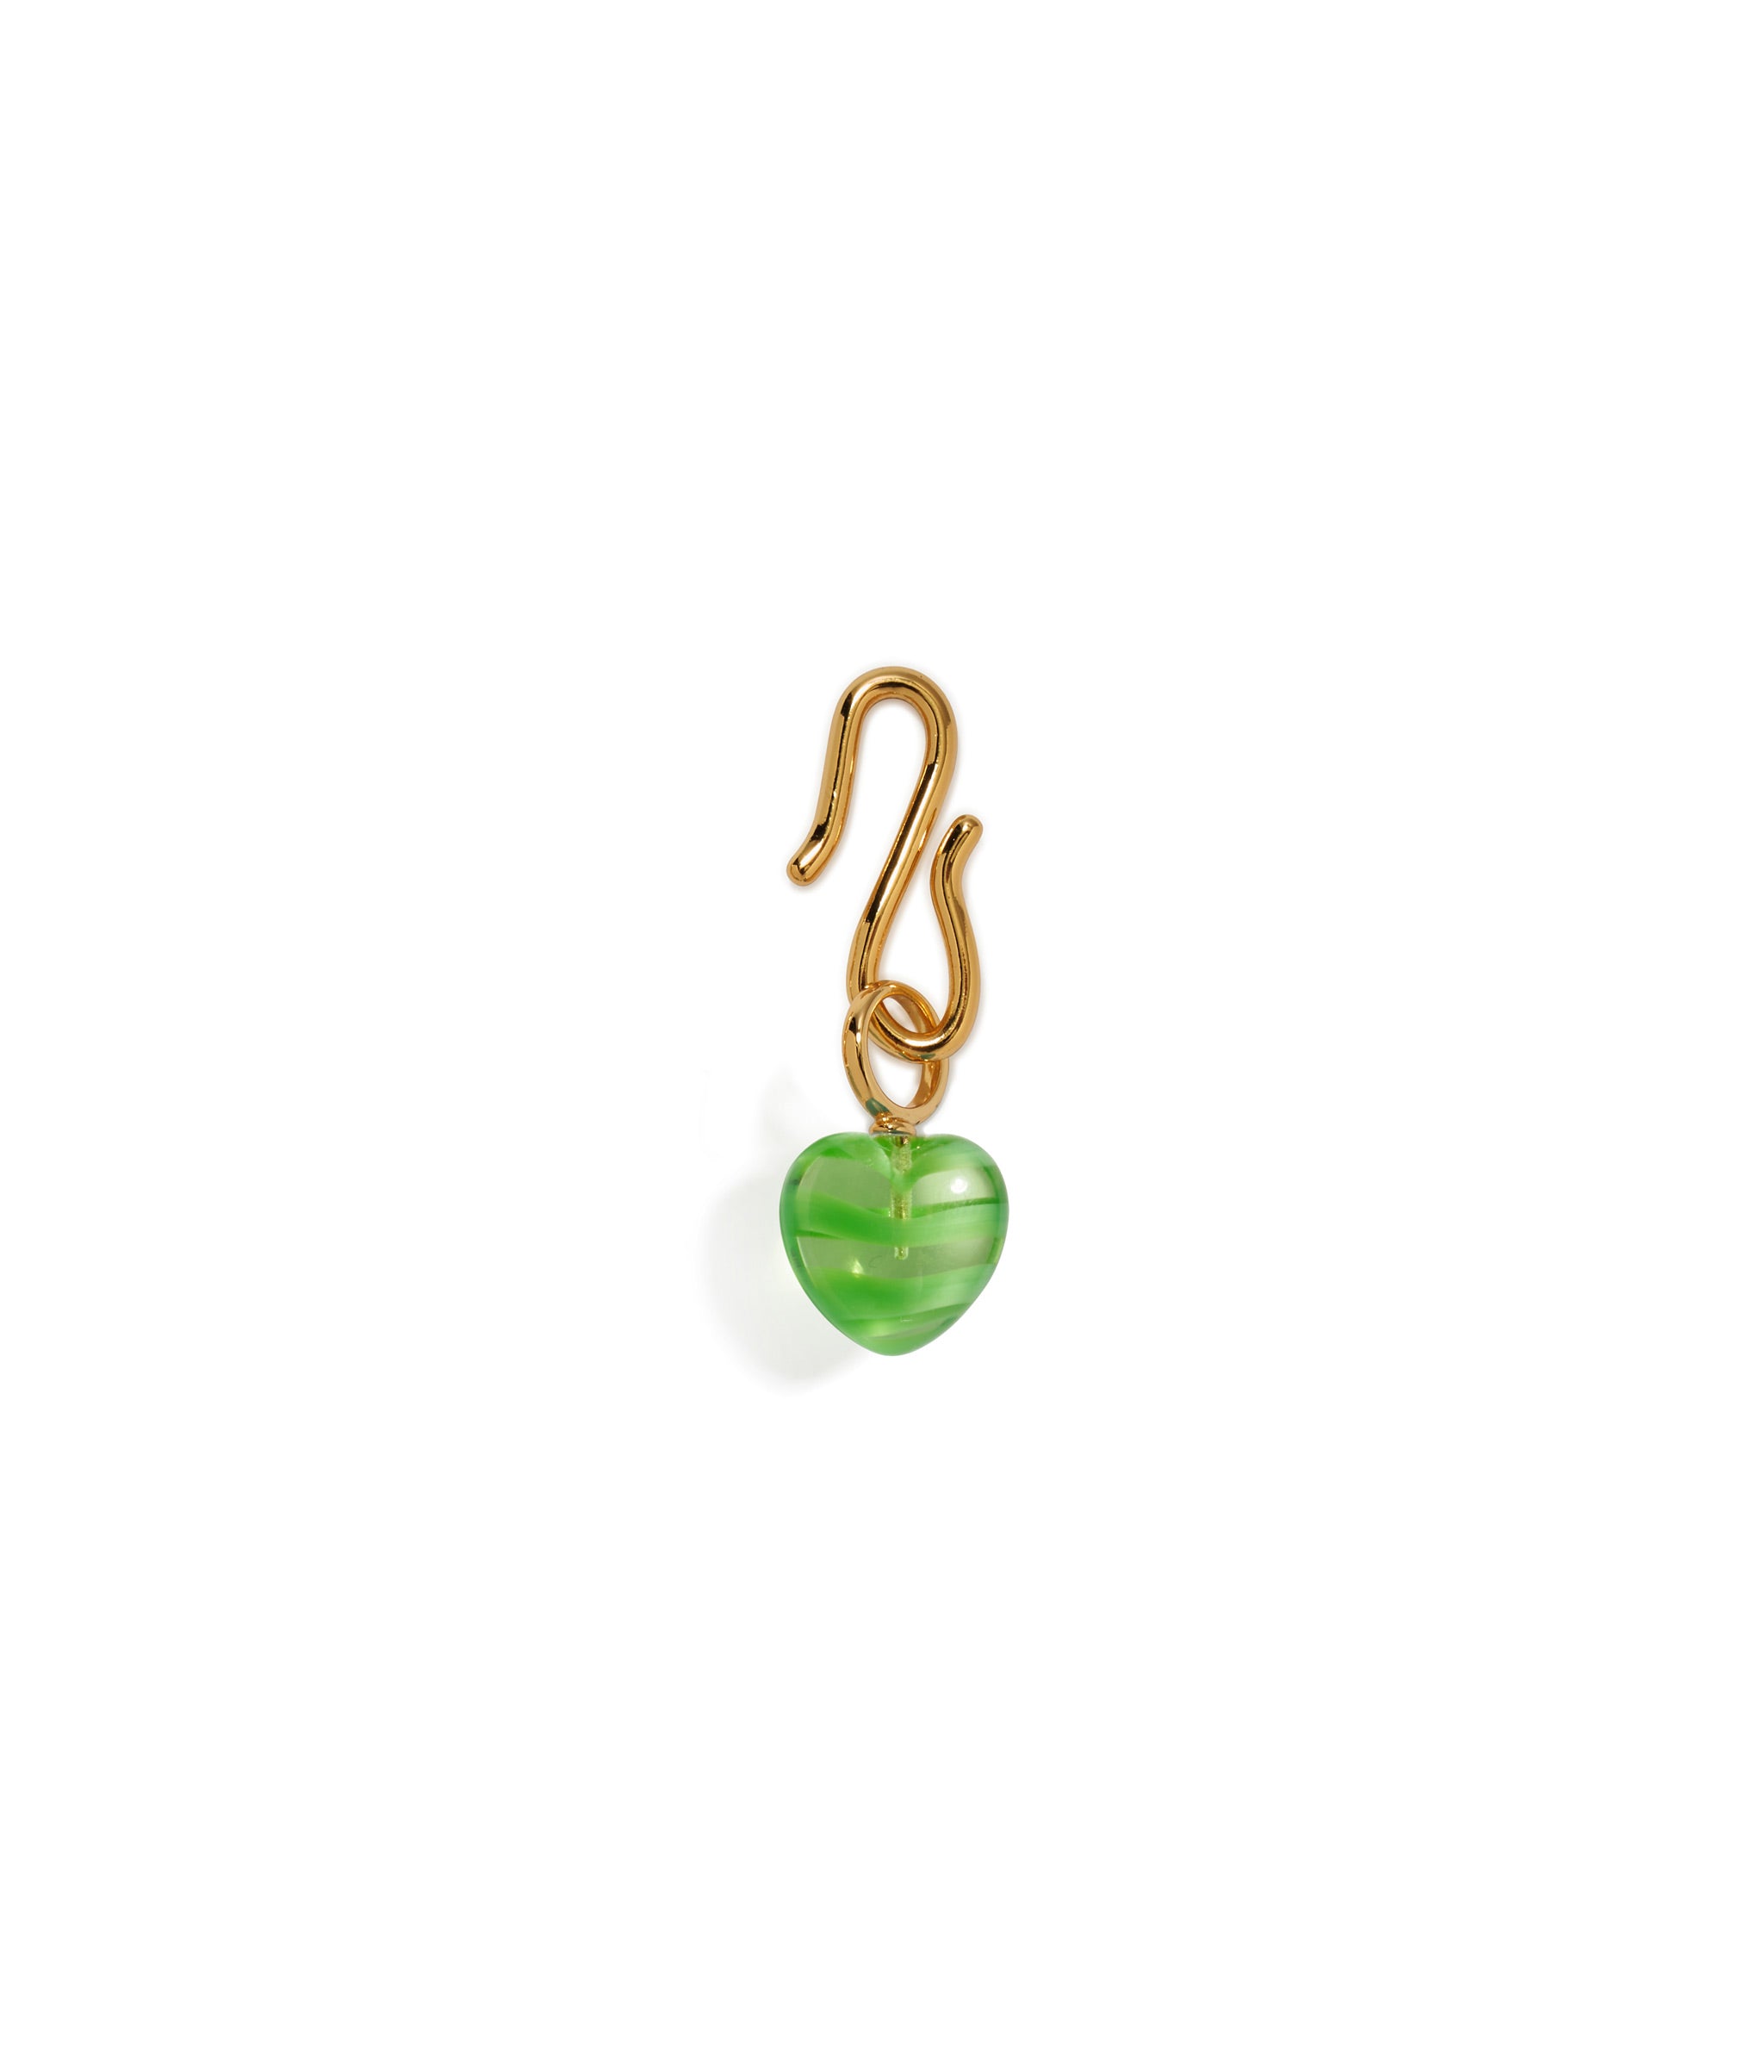 Green Envy Charm. Green striped glass heart necklace charm with gold-plated brass S-hook.